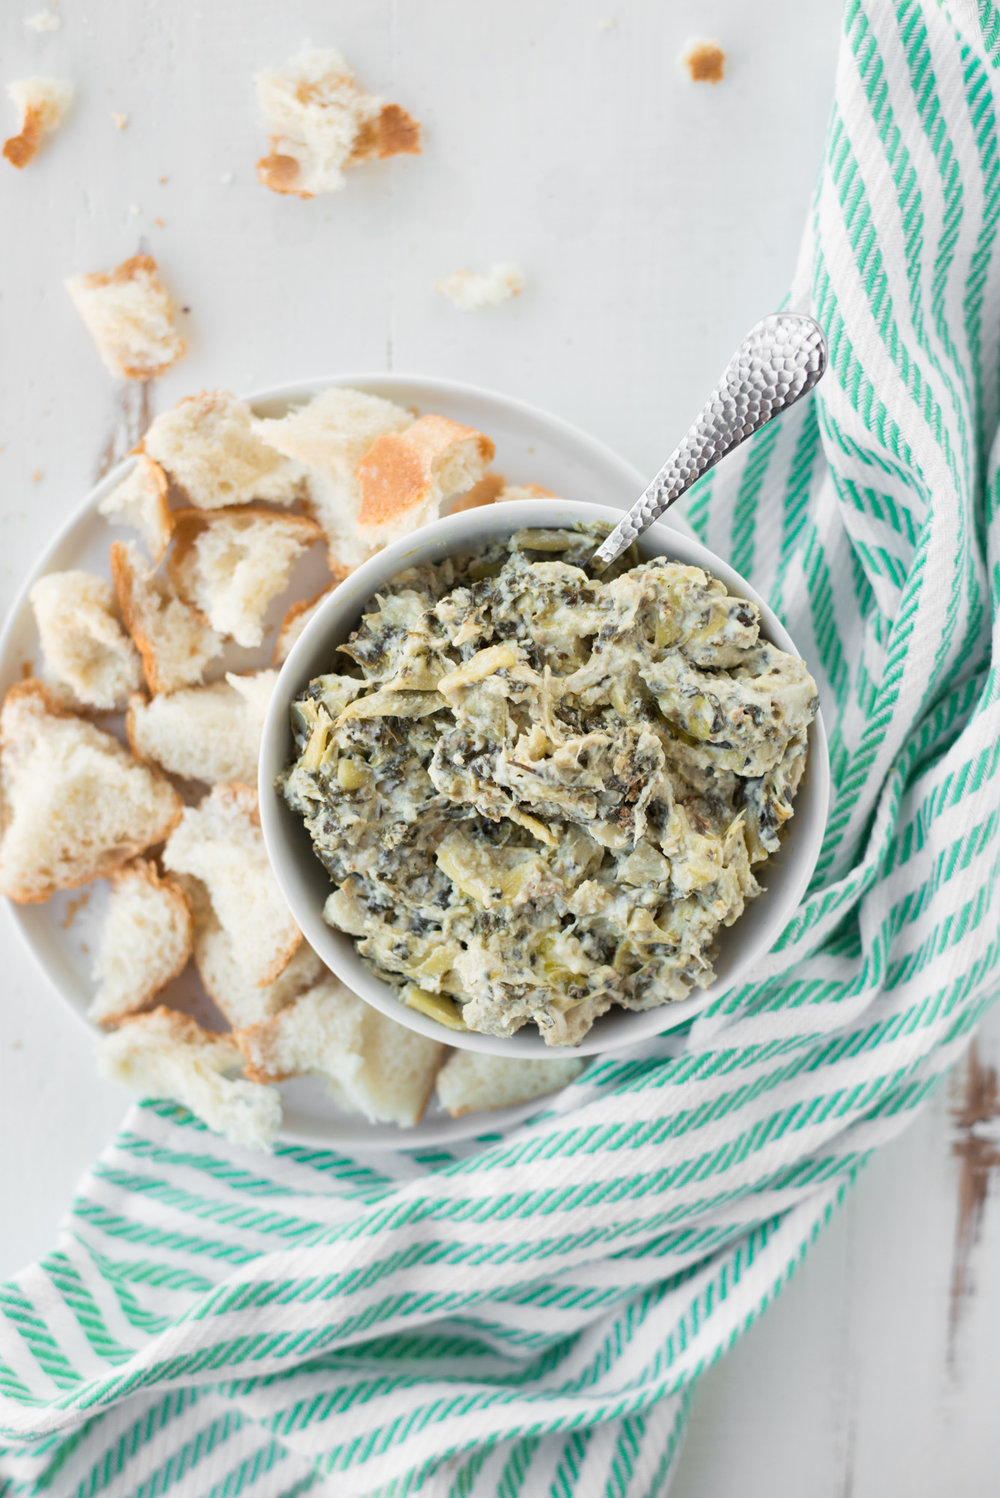 Rich, creamy, and oh-so delicious, Slow Cooker Spinach Artichoke Dip (Dairy-Free, Gluten-Free) will be the hit of your next party or gathering! #realfoodwholelife #healthy #recipe #realfood #cleaneating #glutenfree #dairyfree #soyfree #grainfree #paleo #whole30 #instantpot #crockpot #vegetarian #vegan